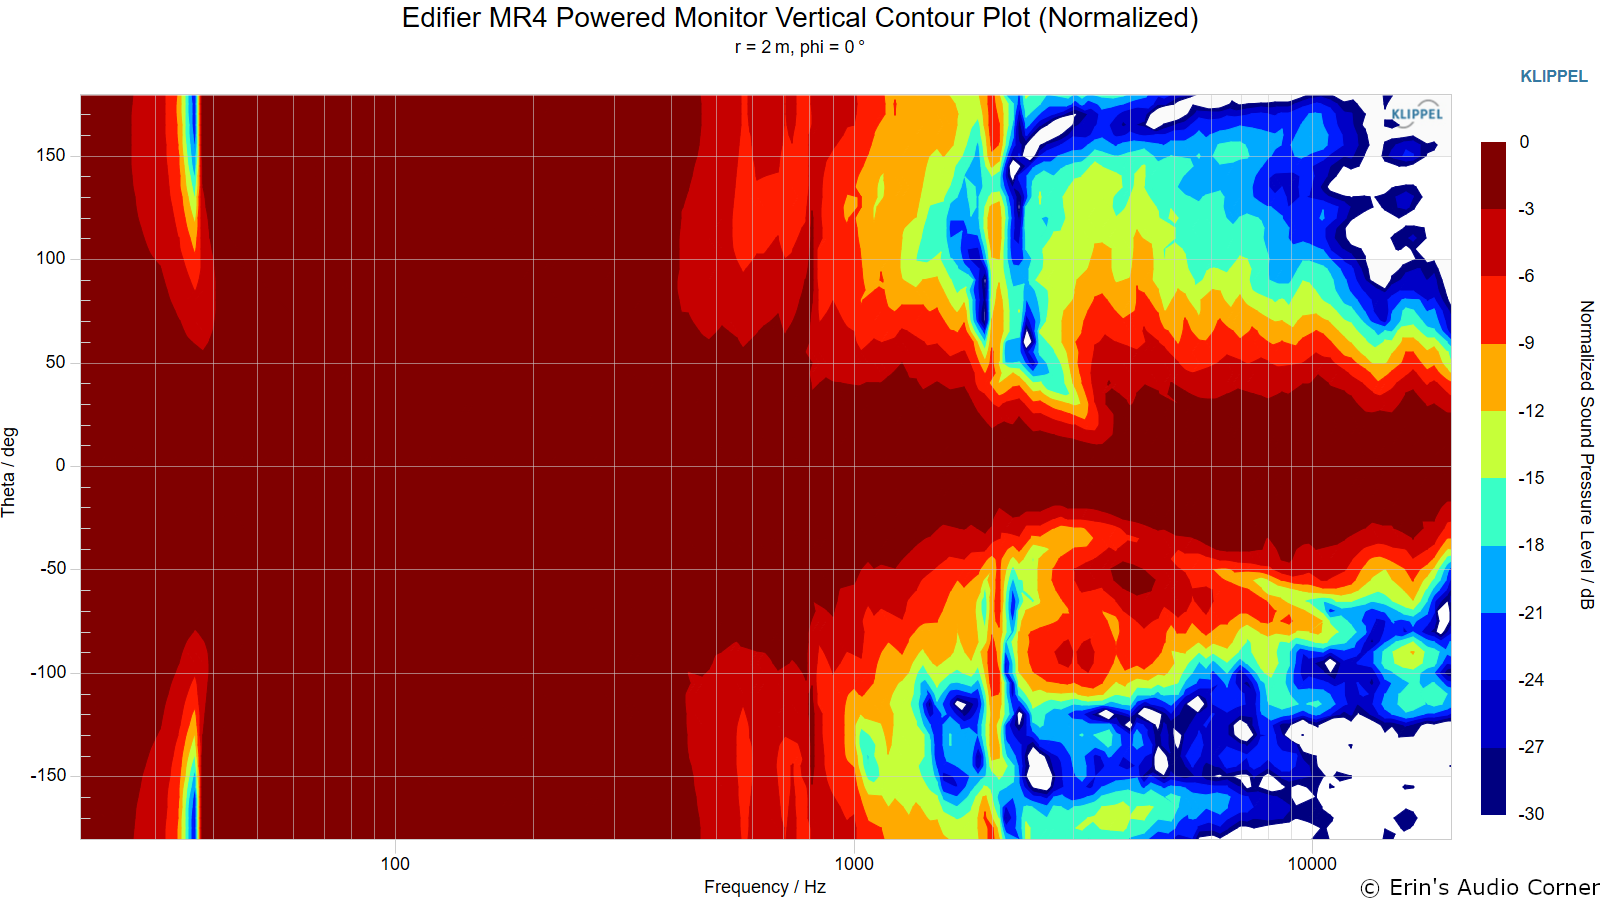 Edifier%20MR4%20Powered%20Monitor%20Vertical%20Contour%20Plot%20%28Normalized%29.png